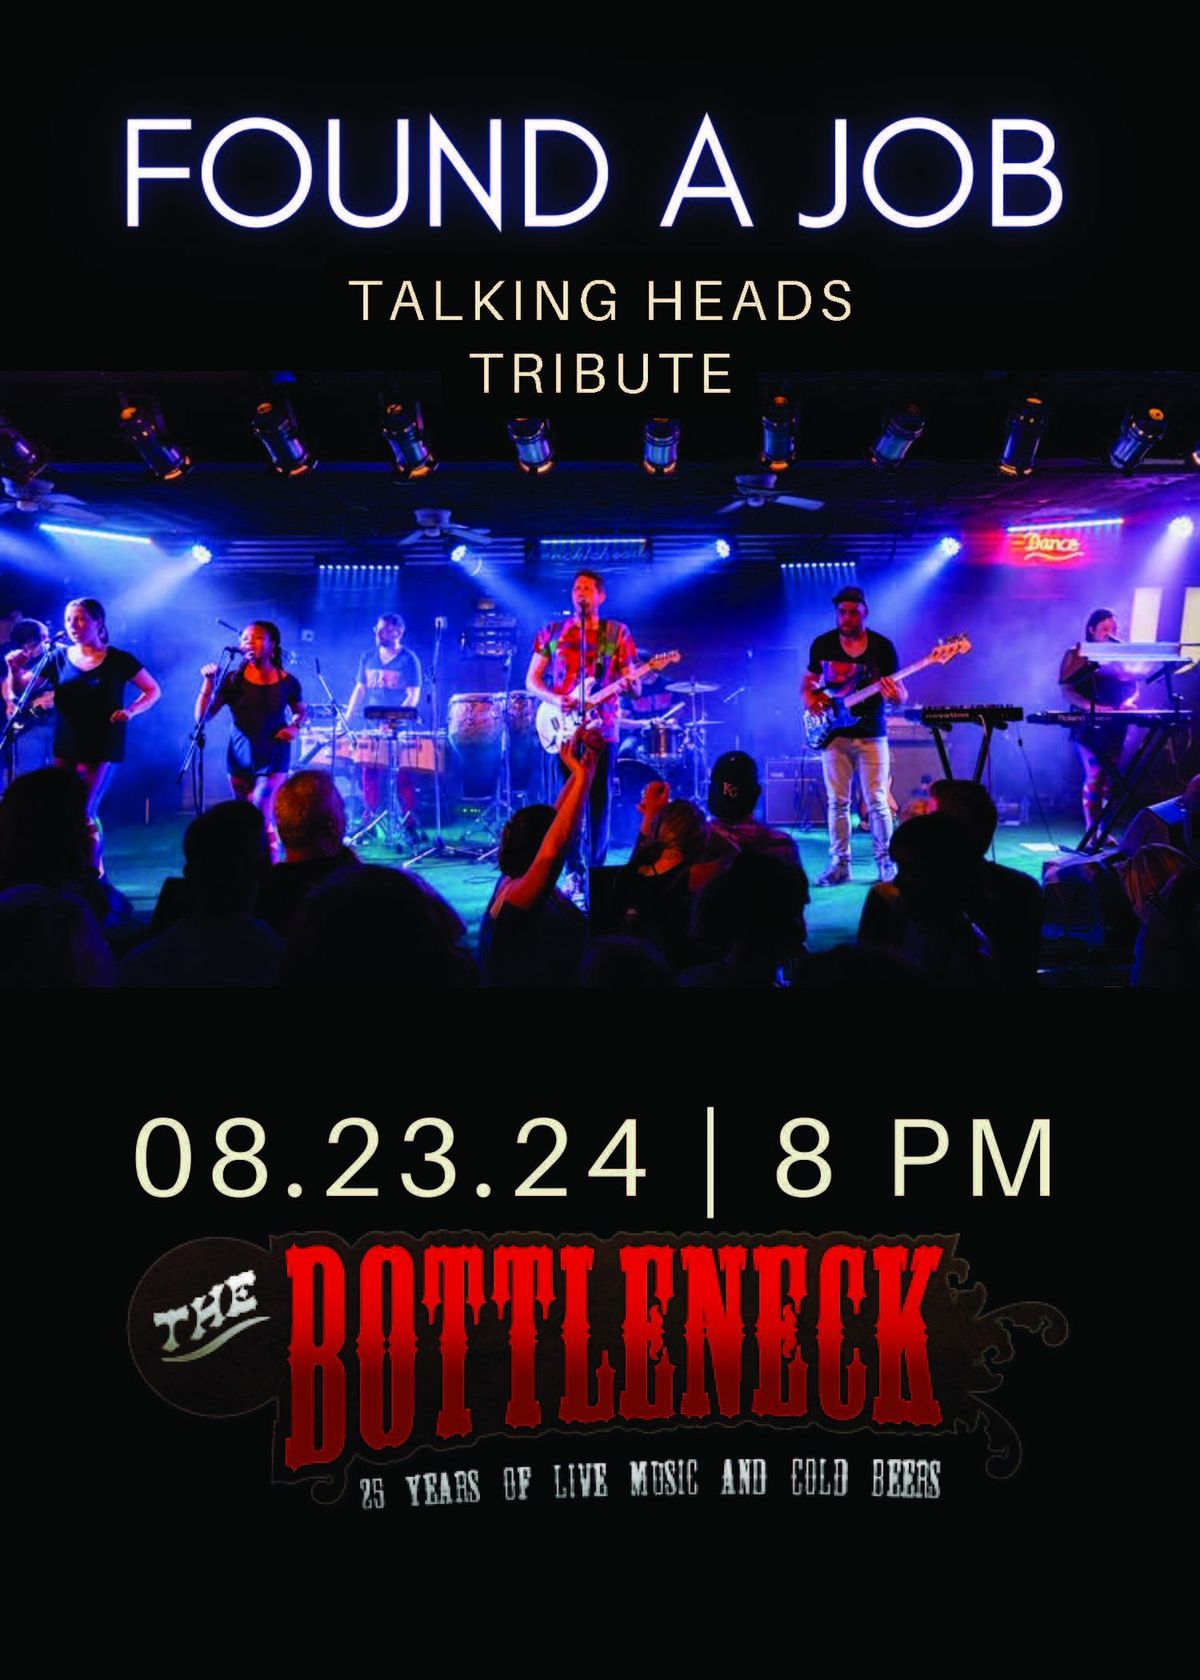 Found a Job: Talking Heads Tribute at The Bottleneck